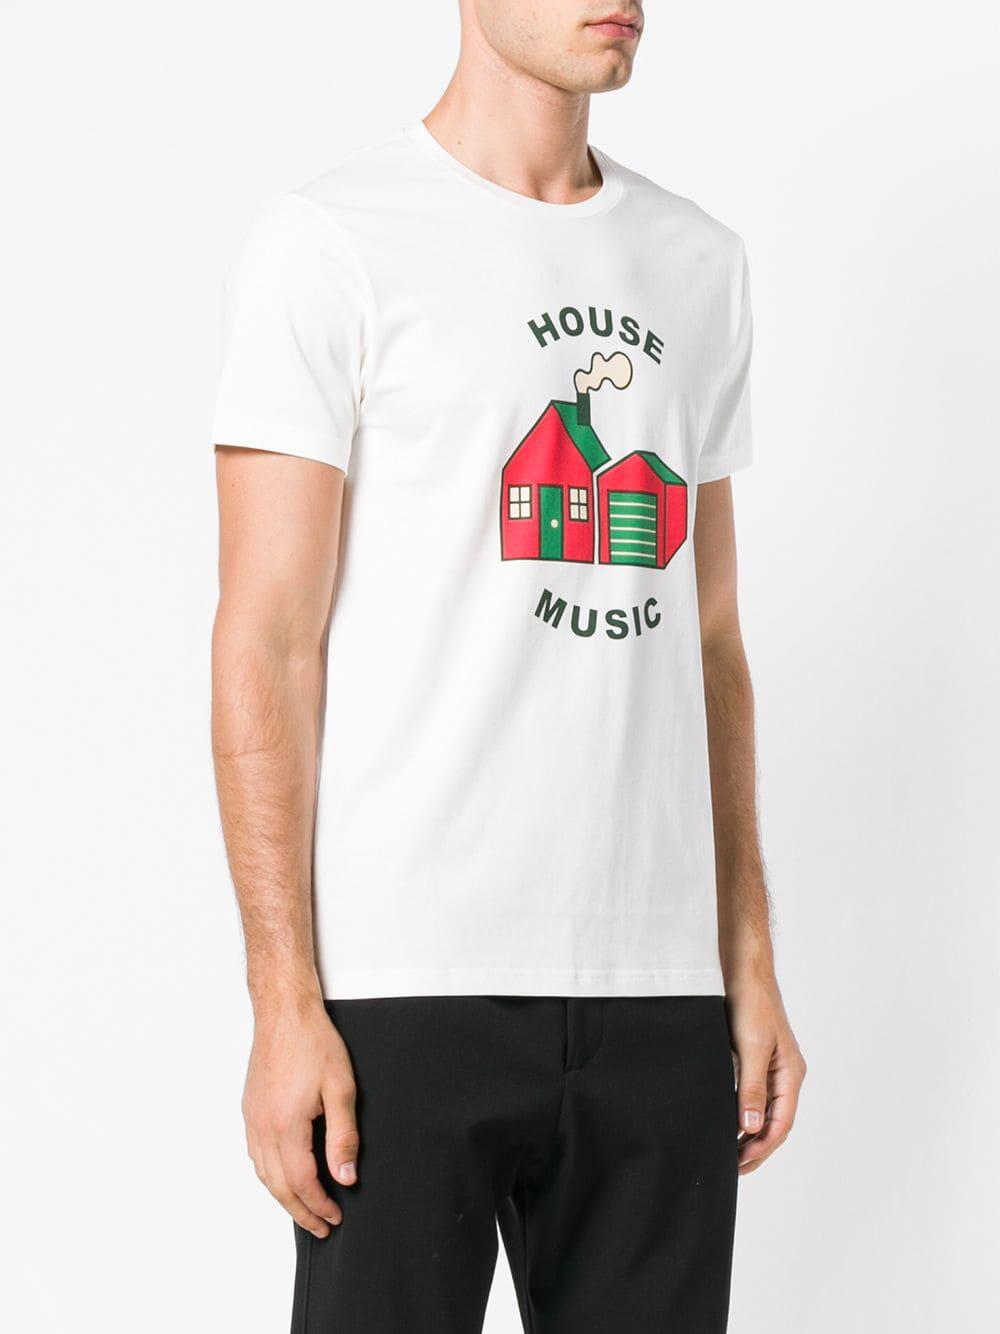 Burberry House Music Print Cotton T-shirt in White for Men - Lyst